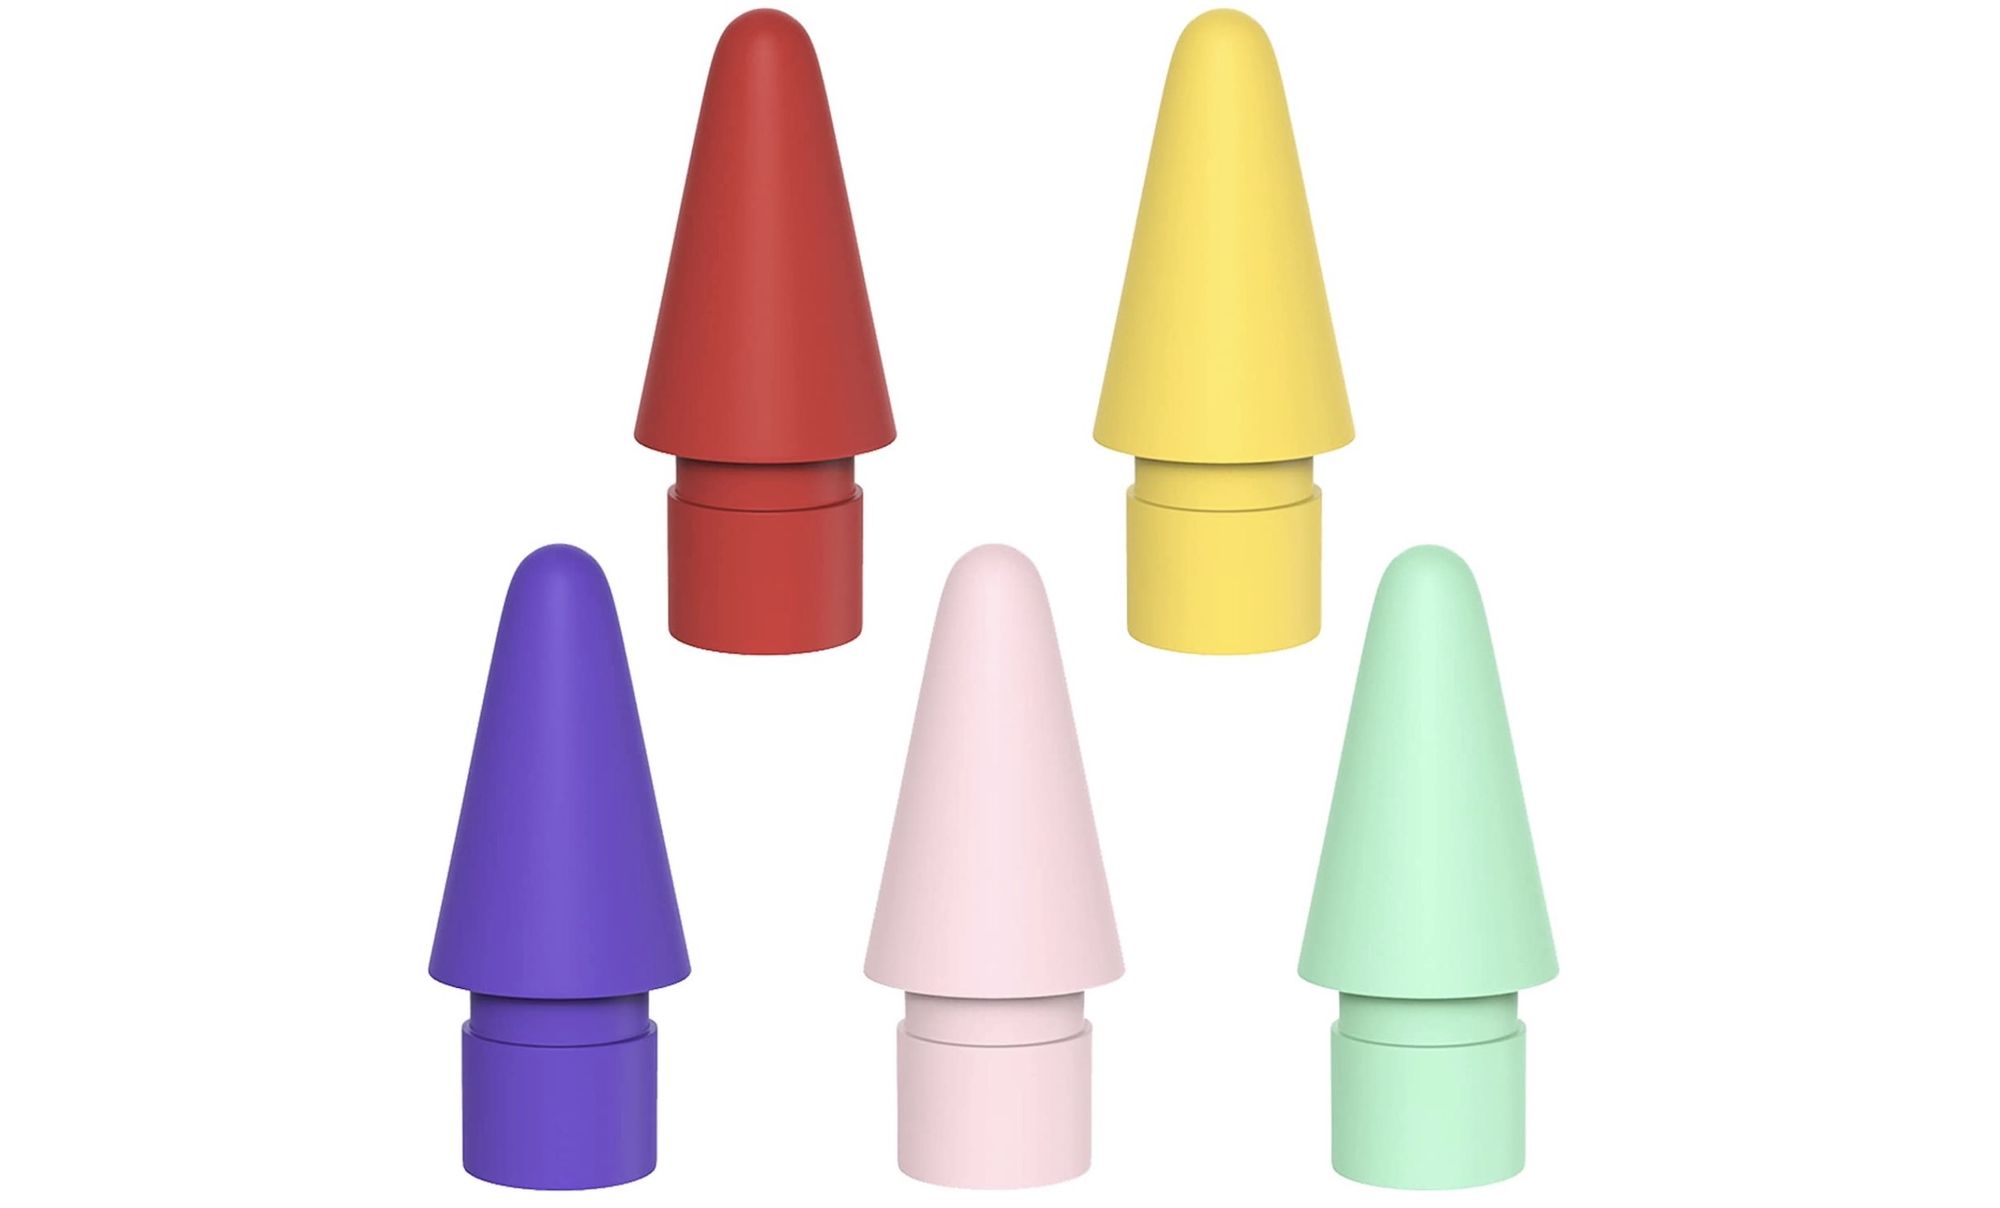 2. AWINNER colored replacement tips for Apple Pencil 2nd Gen and 1st Gen